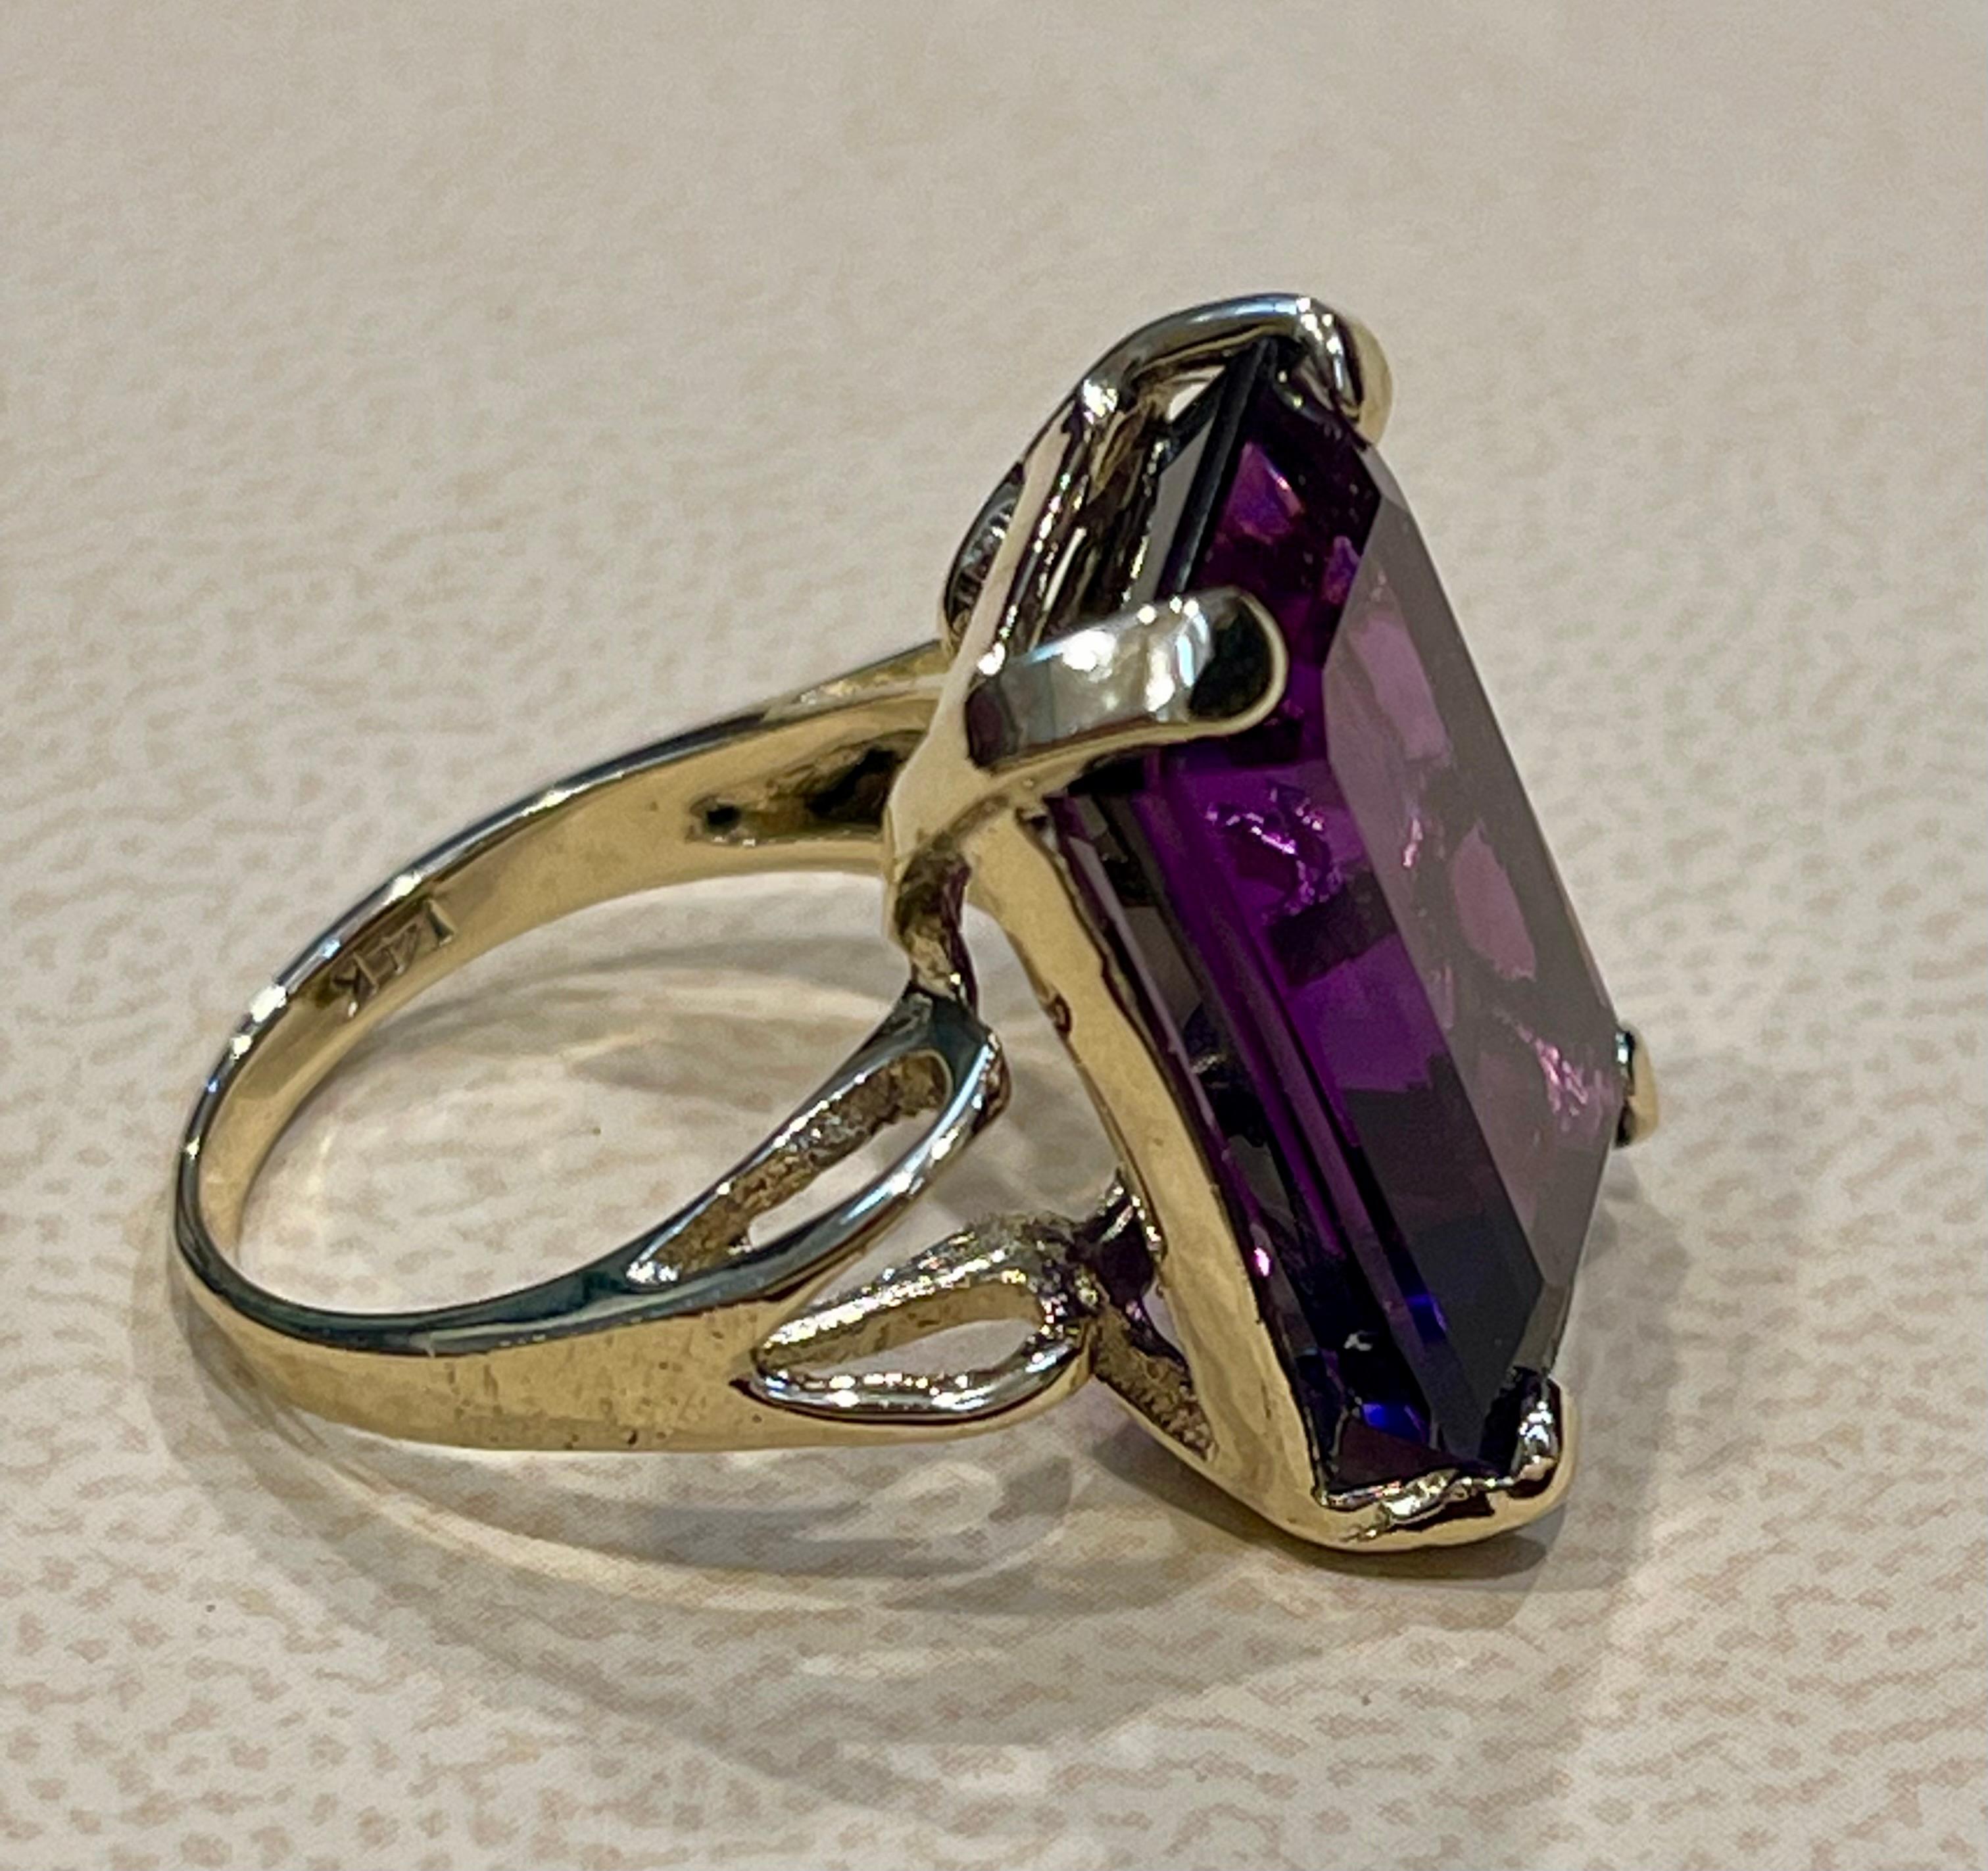 13 Carat Emerald Cut Amethyst Cocktail Ring in 14 Karat Yellow Gold For Sale 7